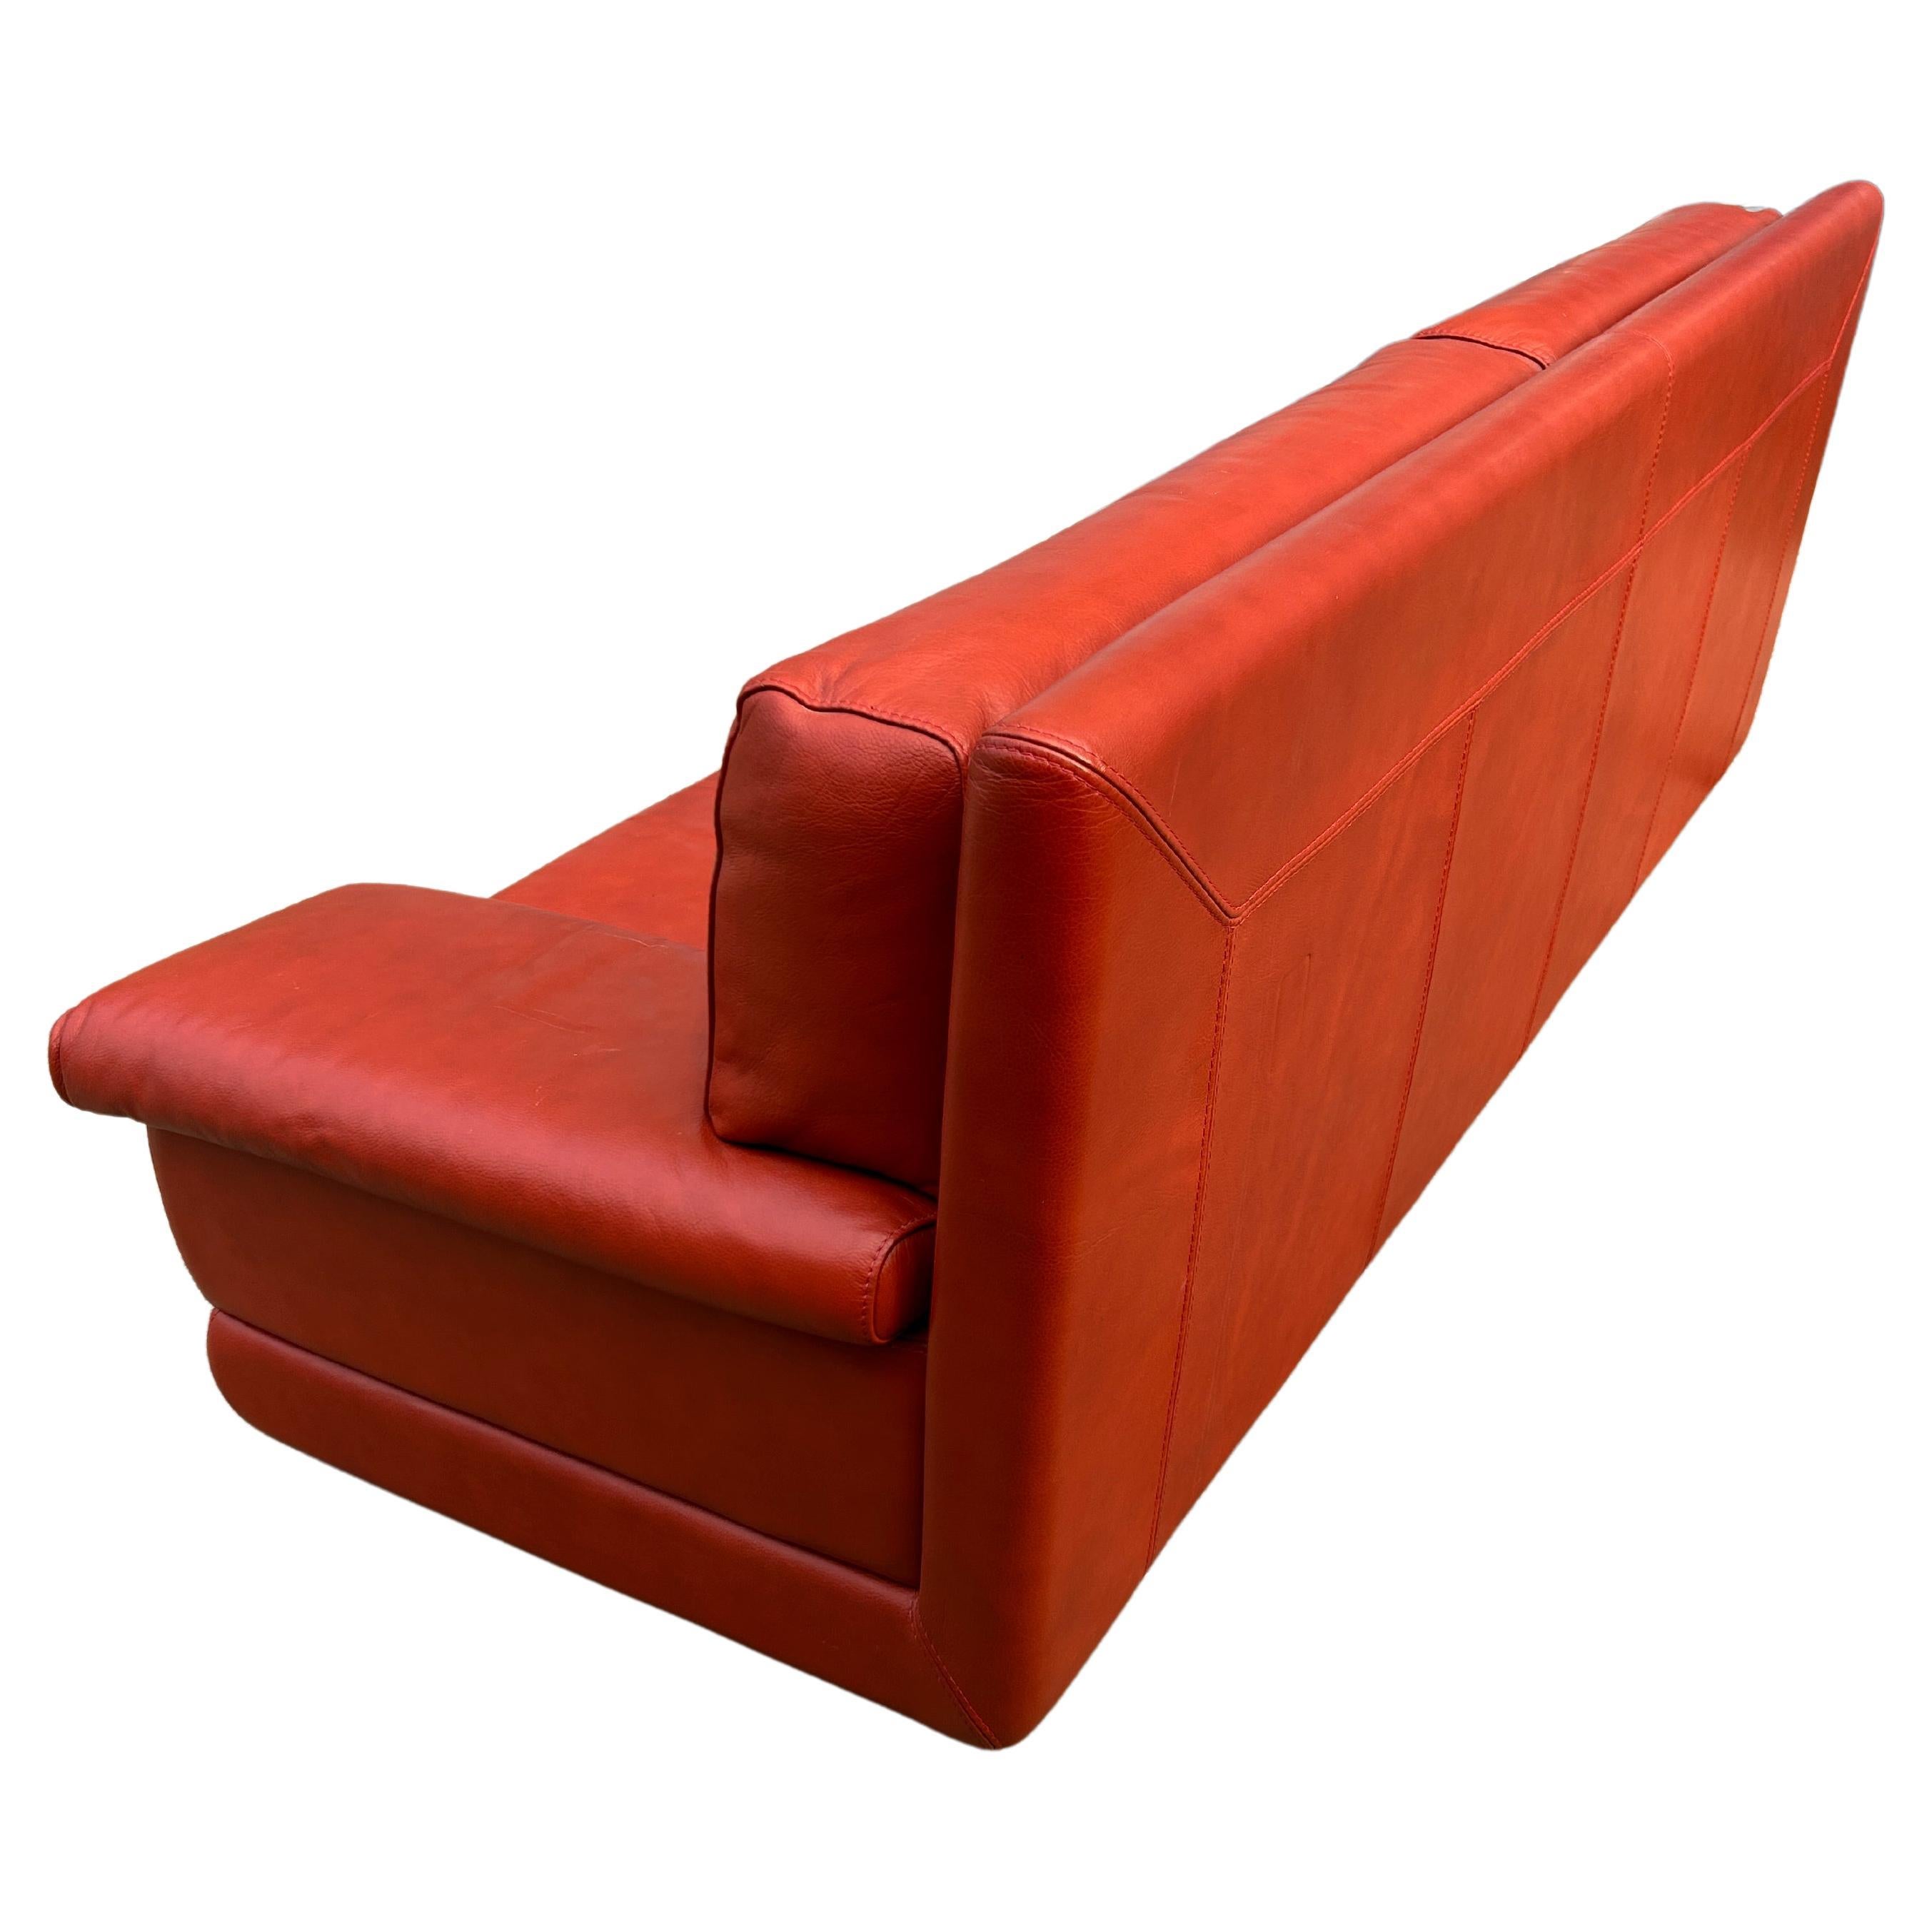 Late 20th Century Mid Century Post Modern Italian Red Leather 3 seat Sofa by Roche Bobois 